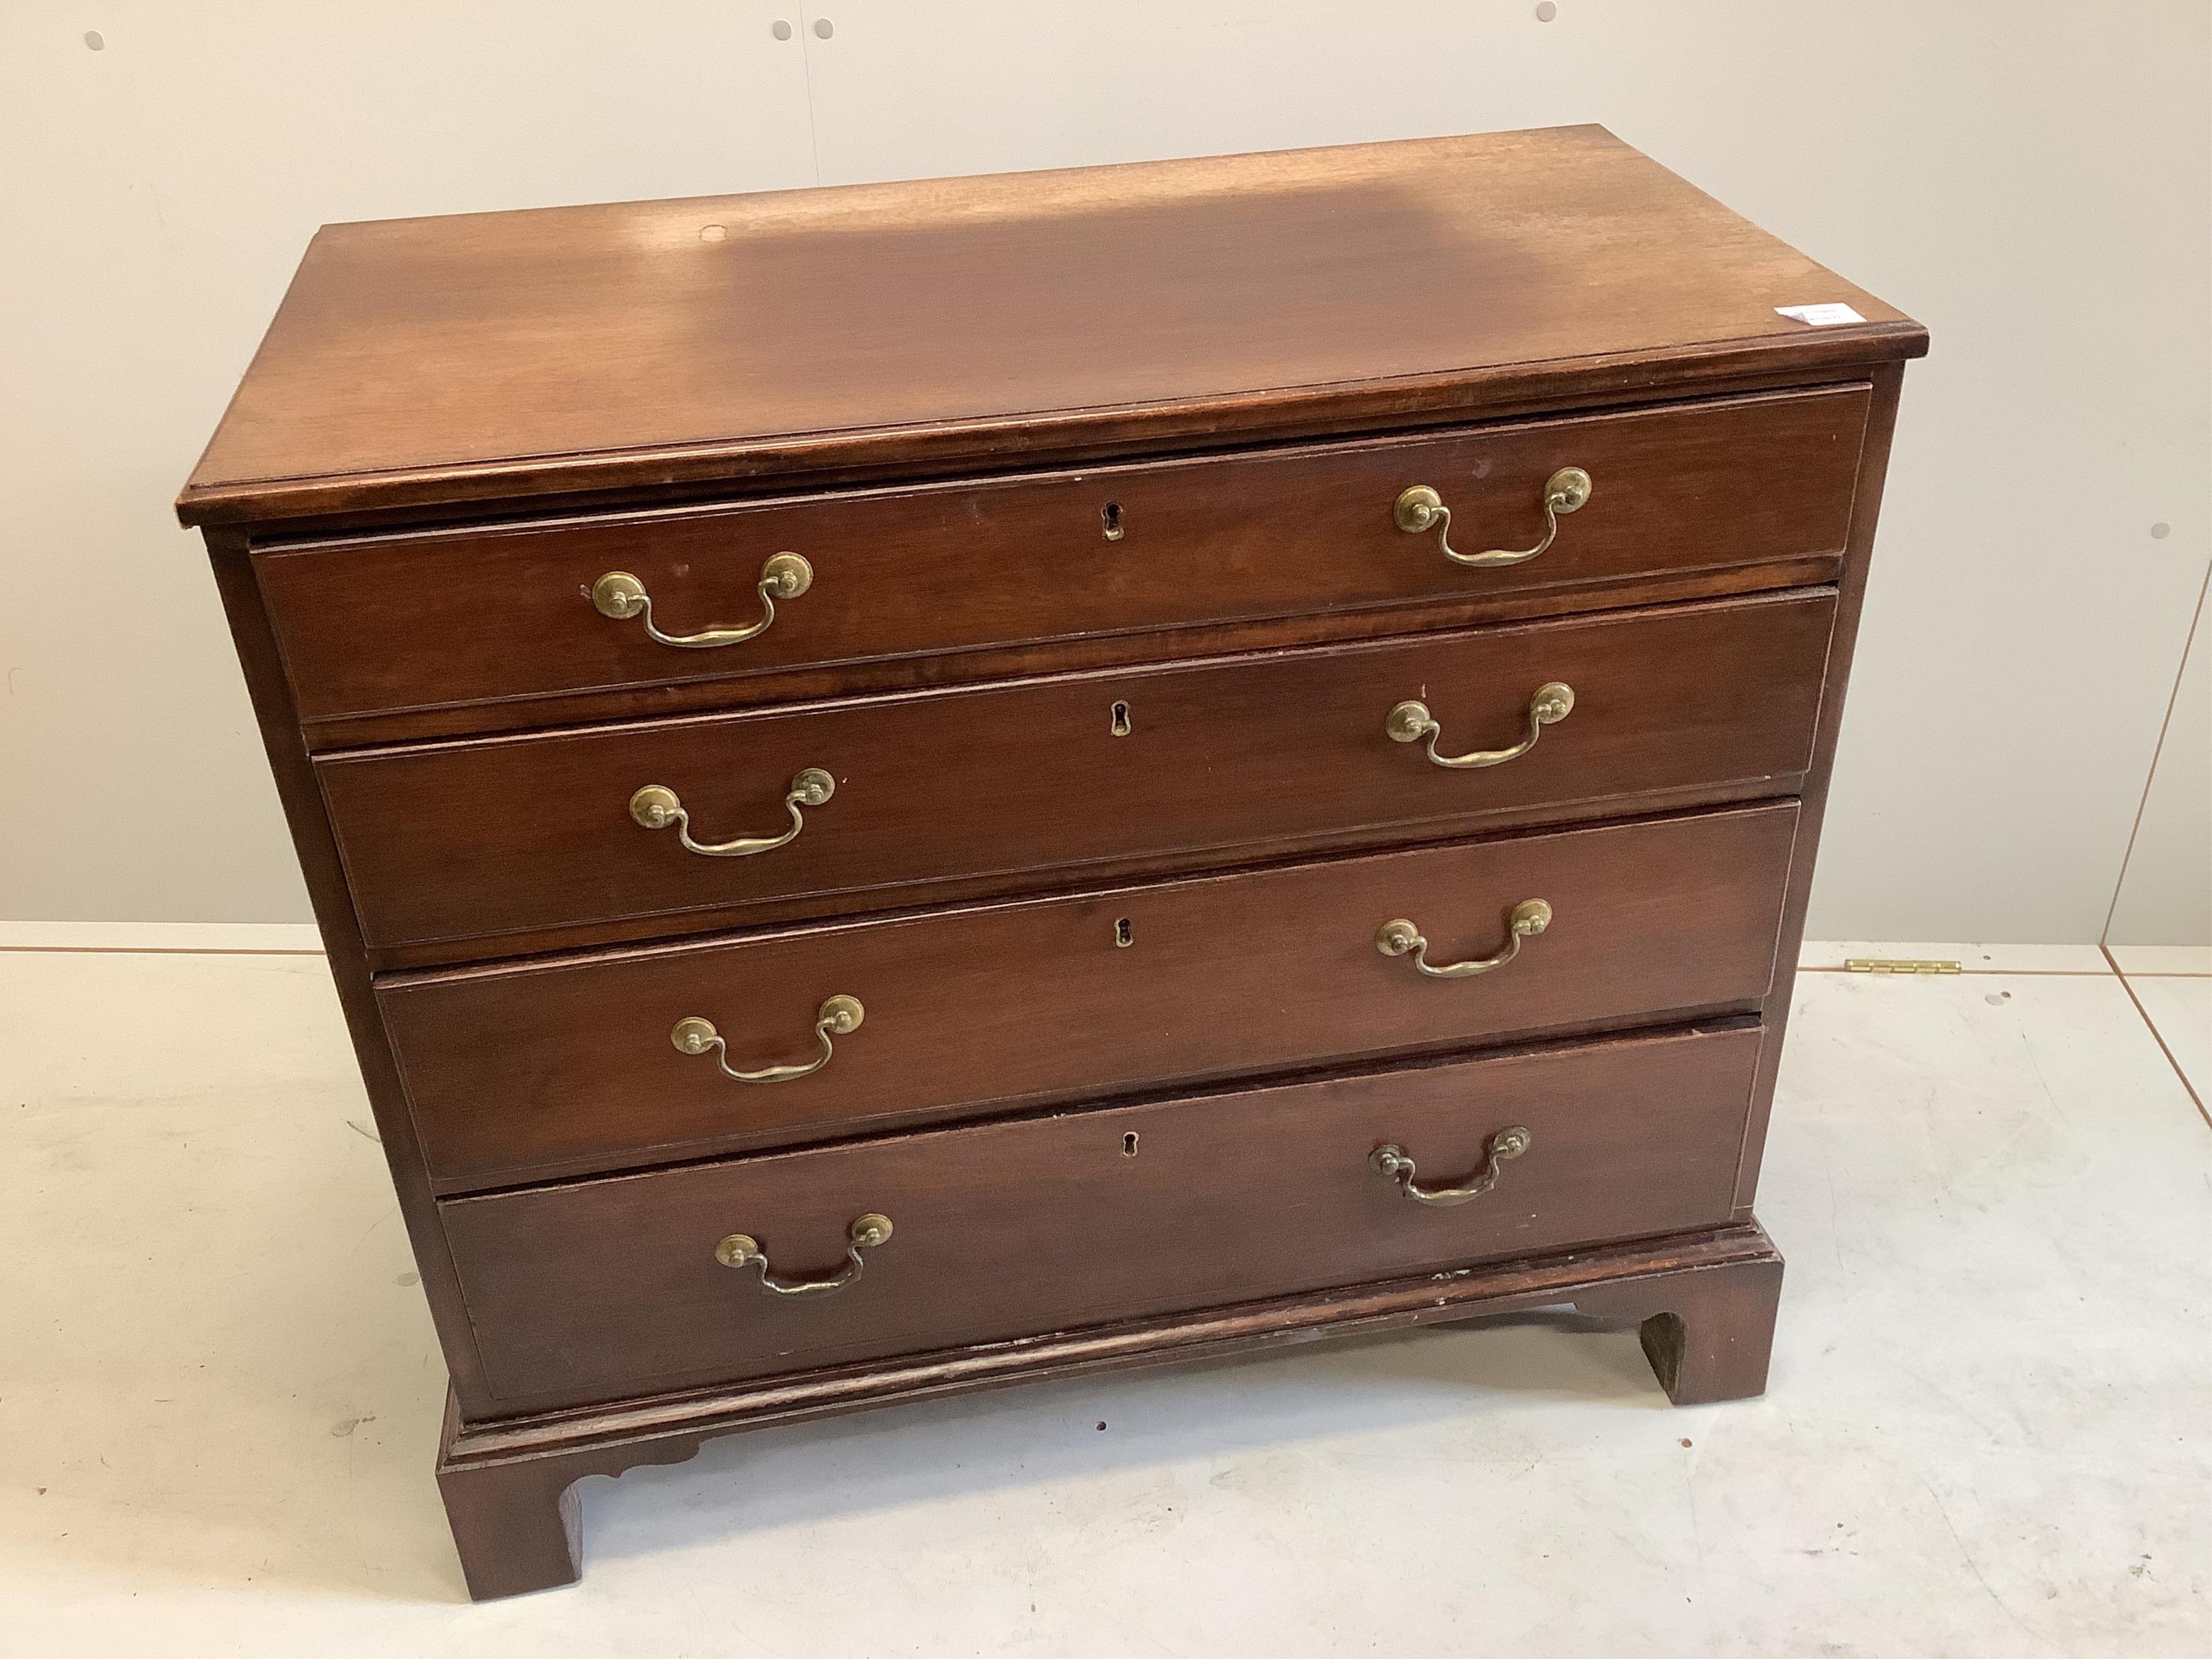 A George III and later mahogany four drawer chest, width 92cm, depth 46cm, height 83cm. Condition - fair